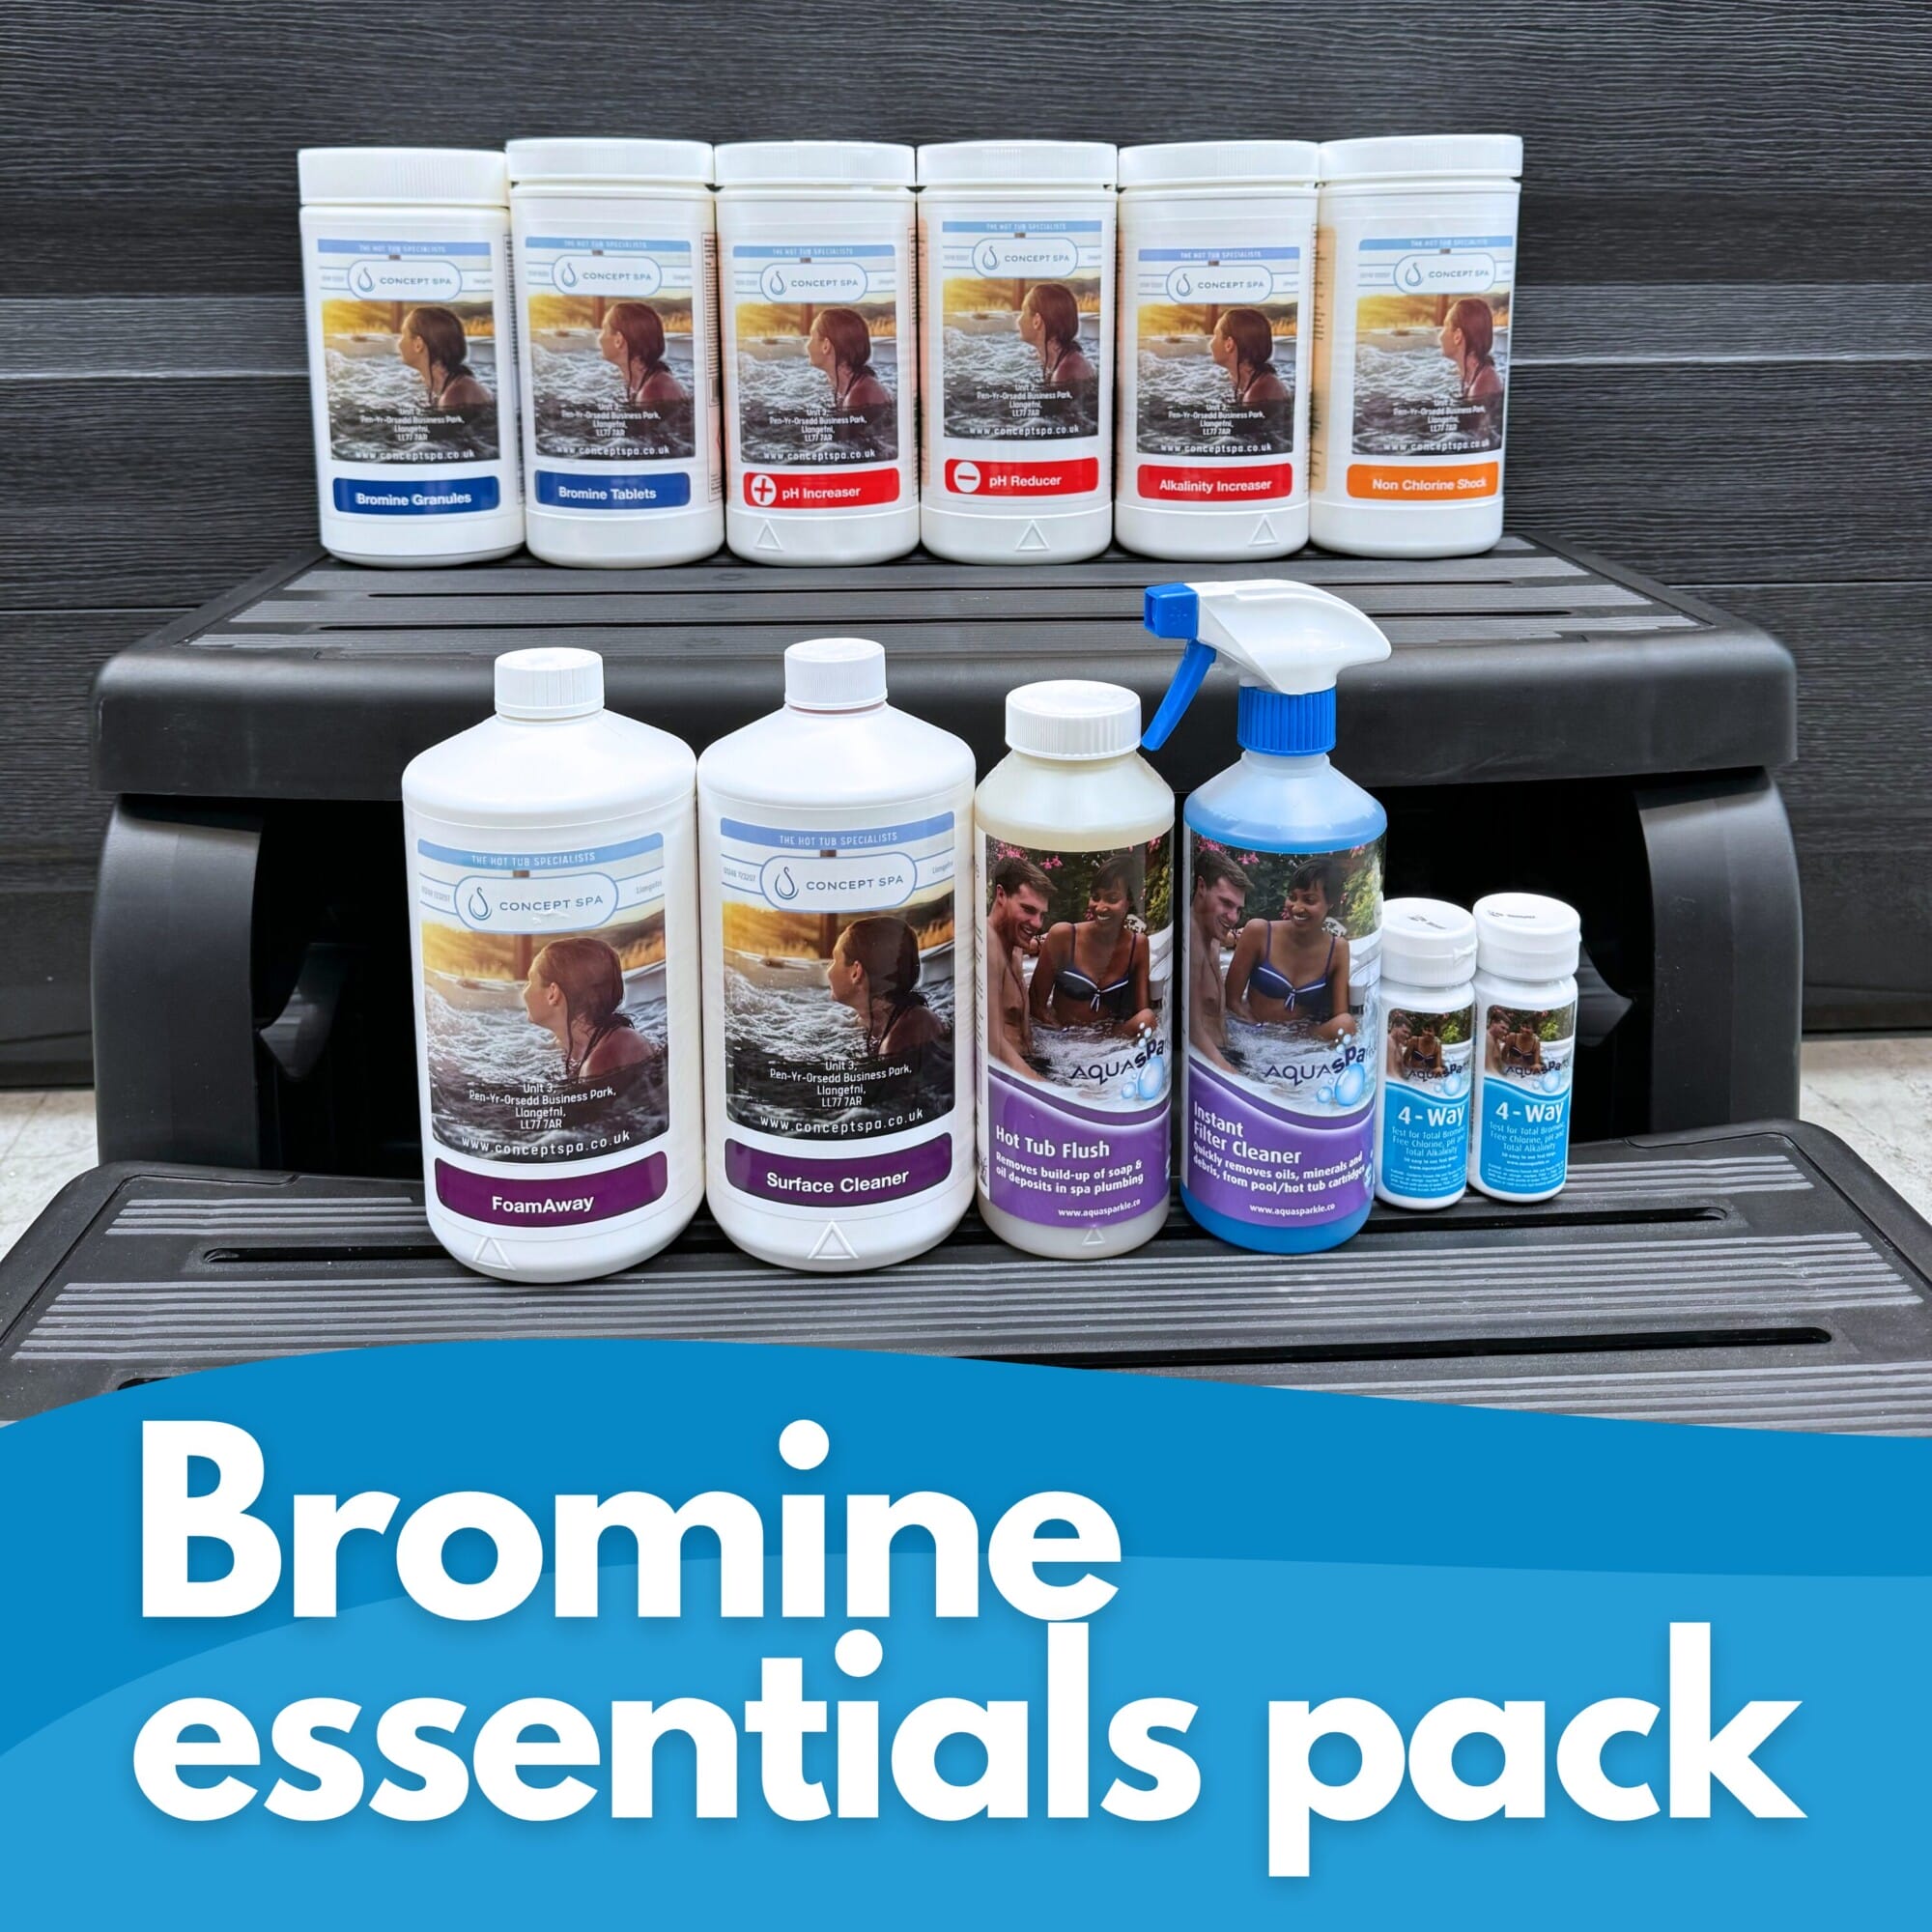 Bromine essentials chemical pack